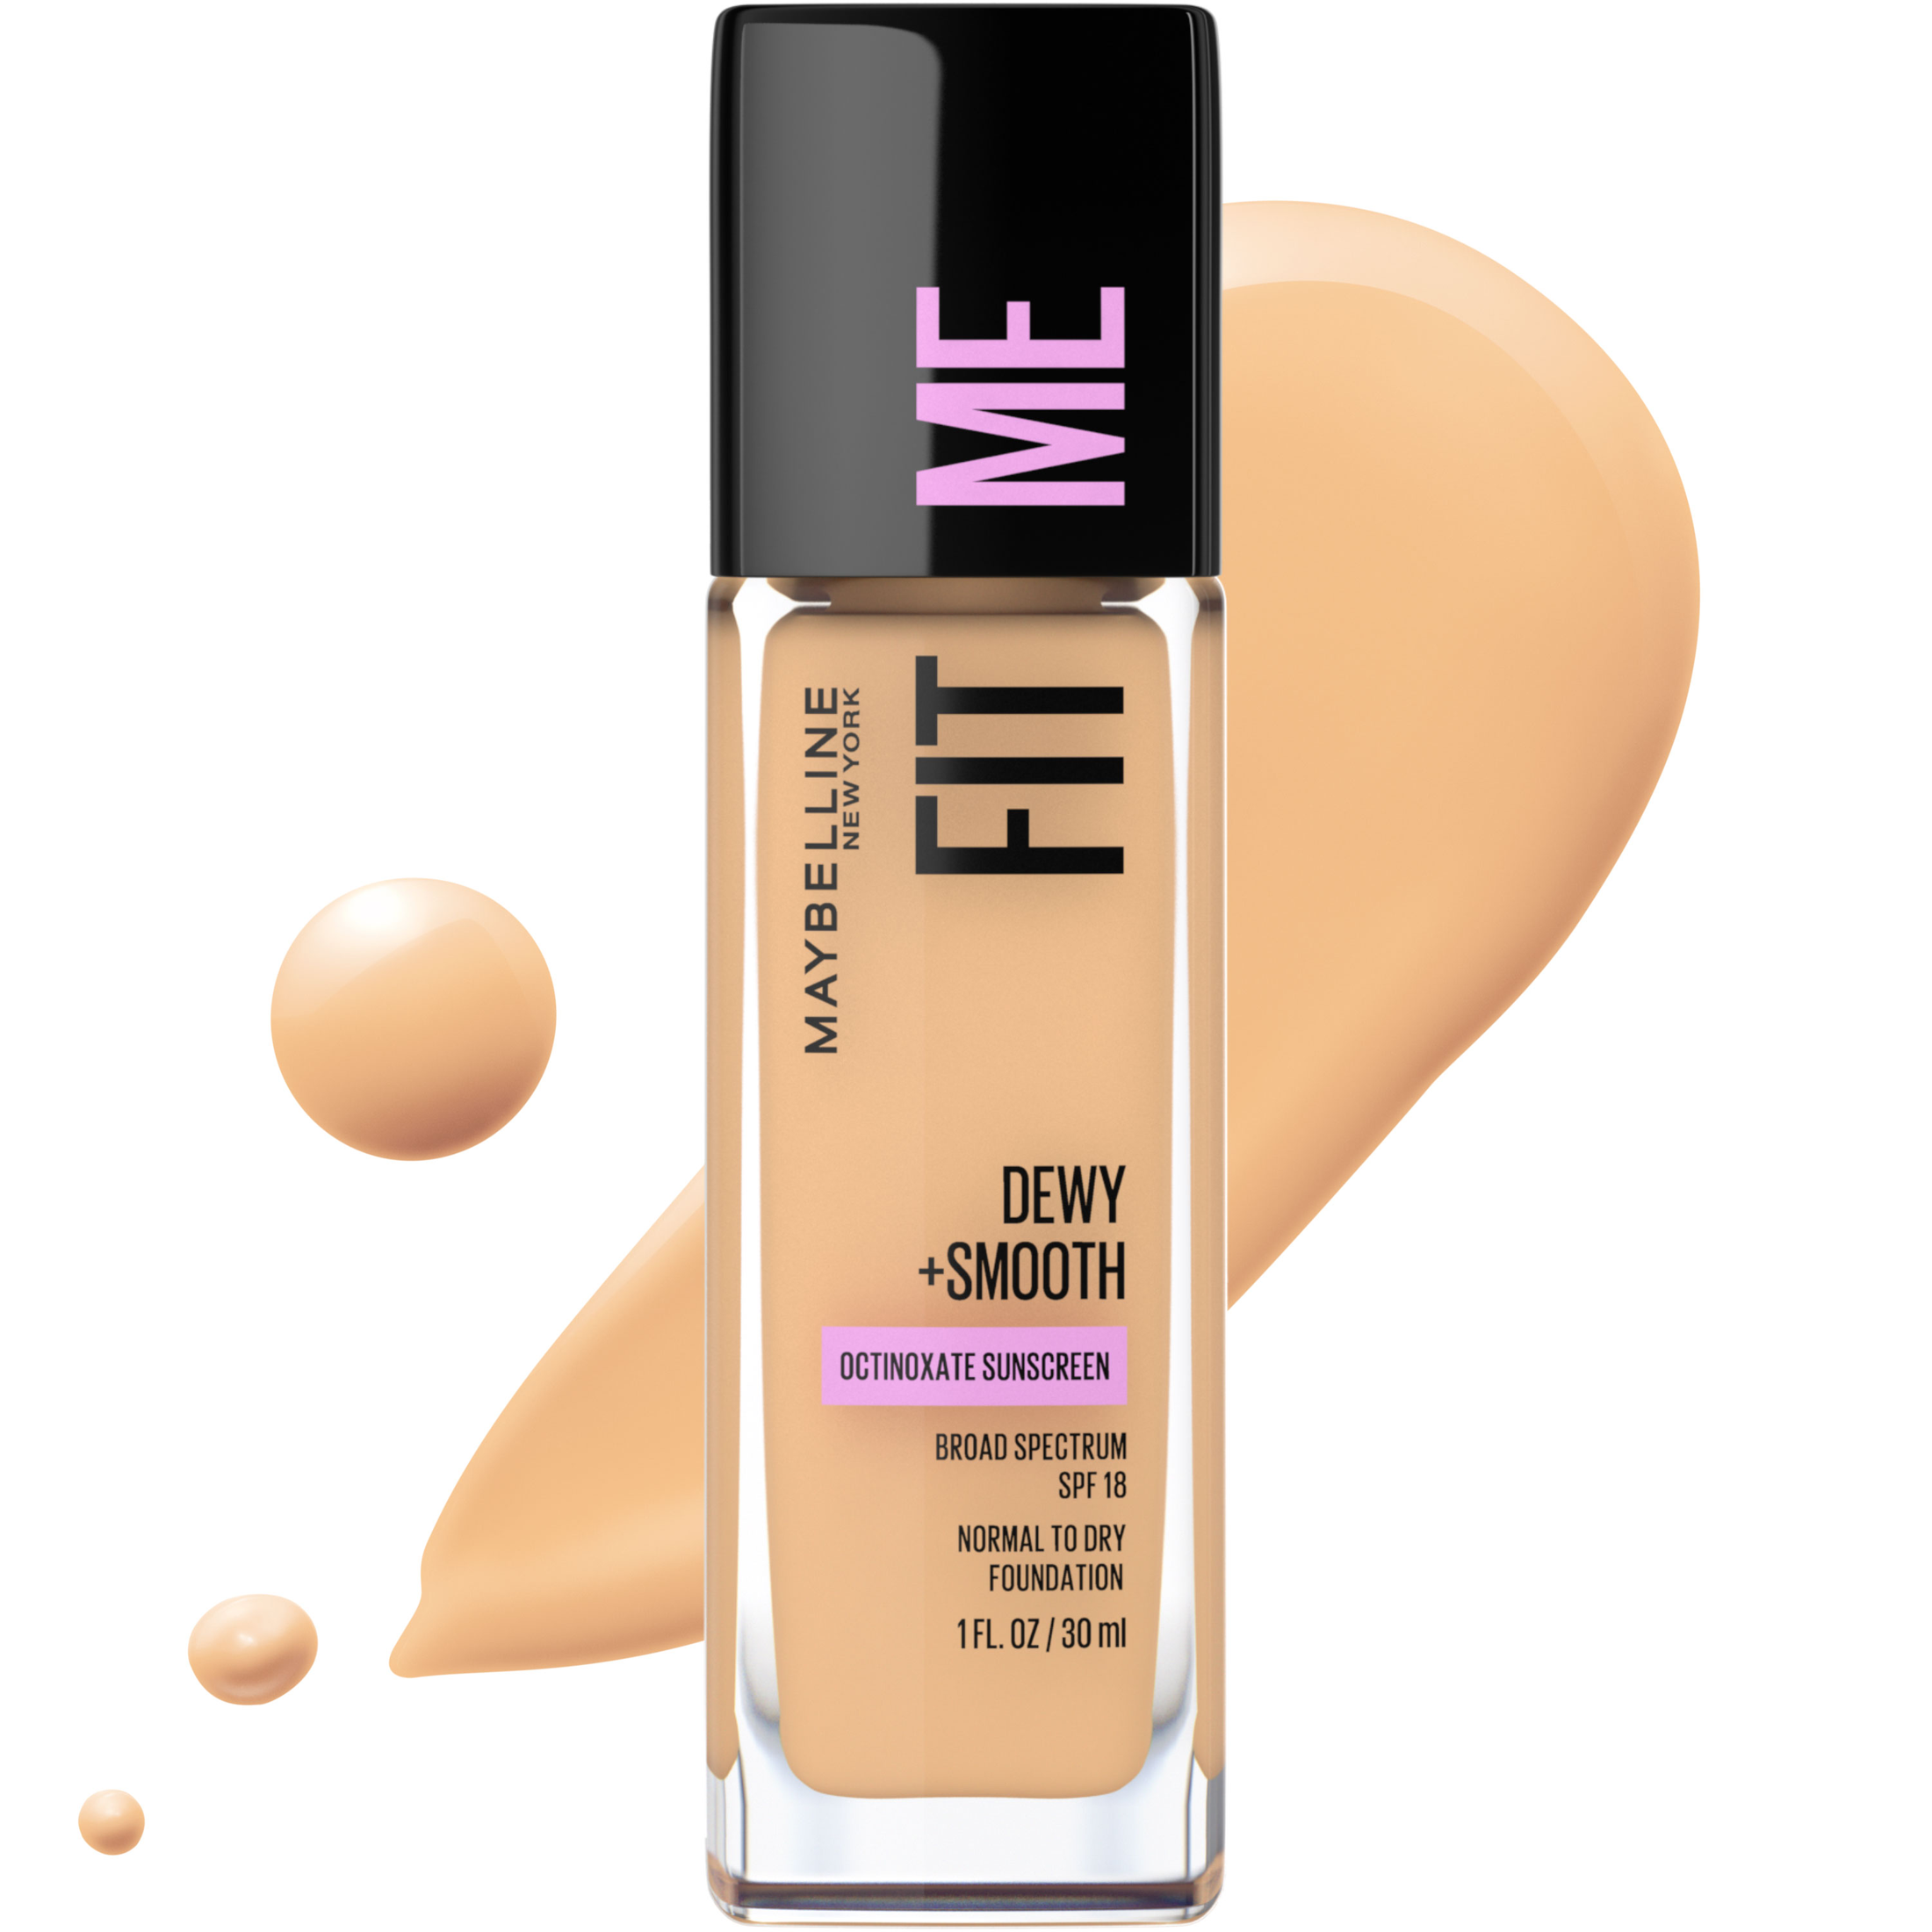 Maybelline Fit Me Dewy and Smooth Liquid Foundation, SPF 18, 220 Natural Beige, 1 fl oz - image 1 of 9